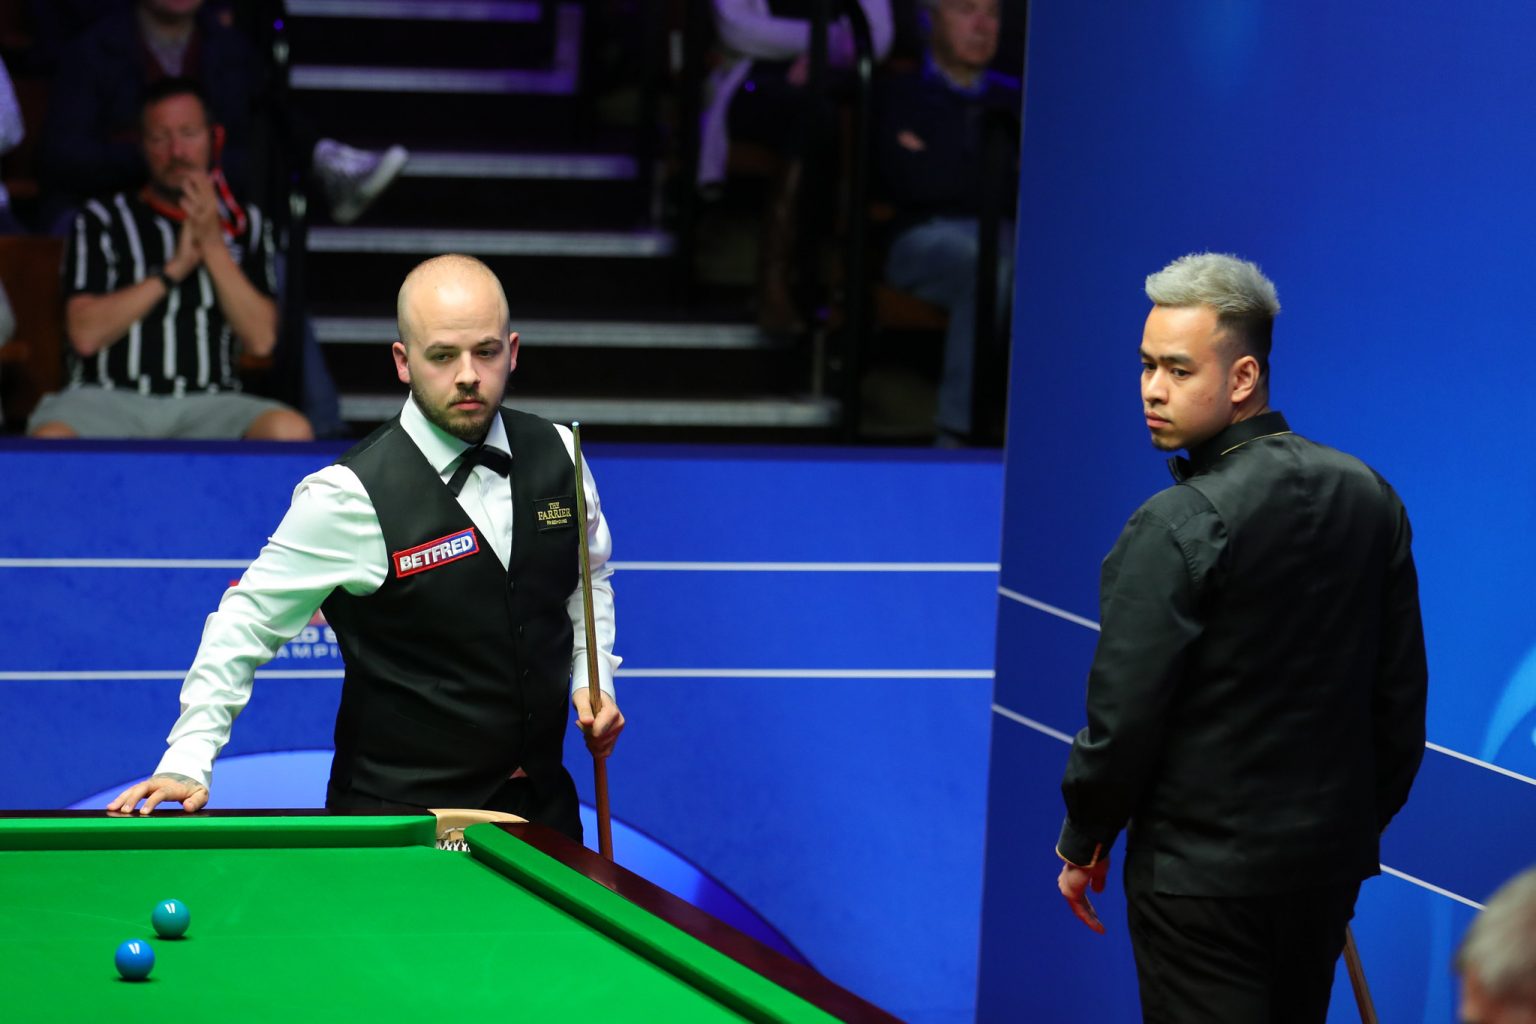 WILSON BEATS DING IN HIGH QUALITY TUSSLE